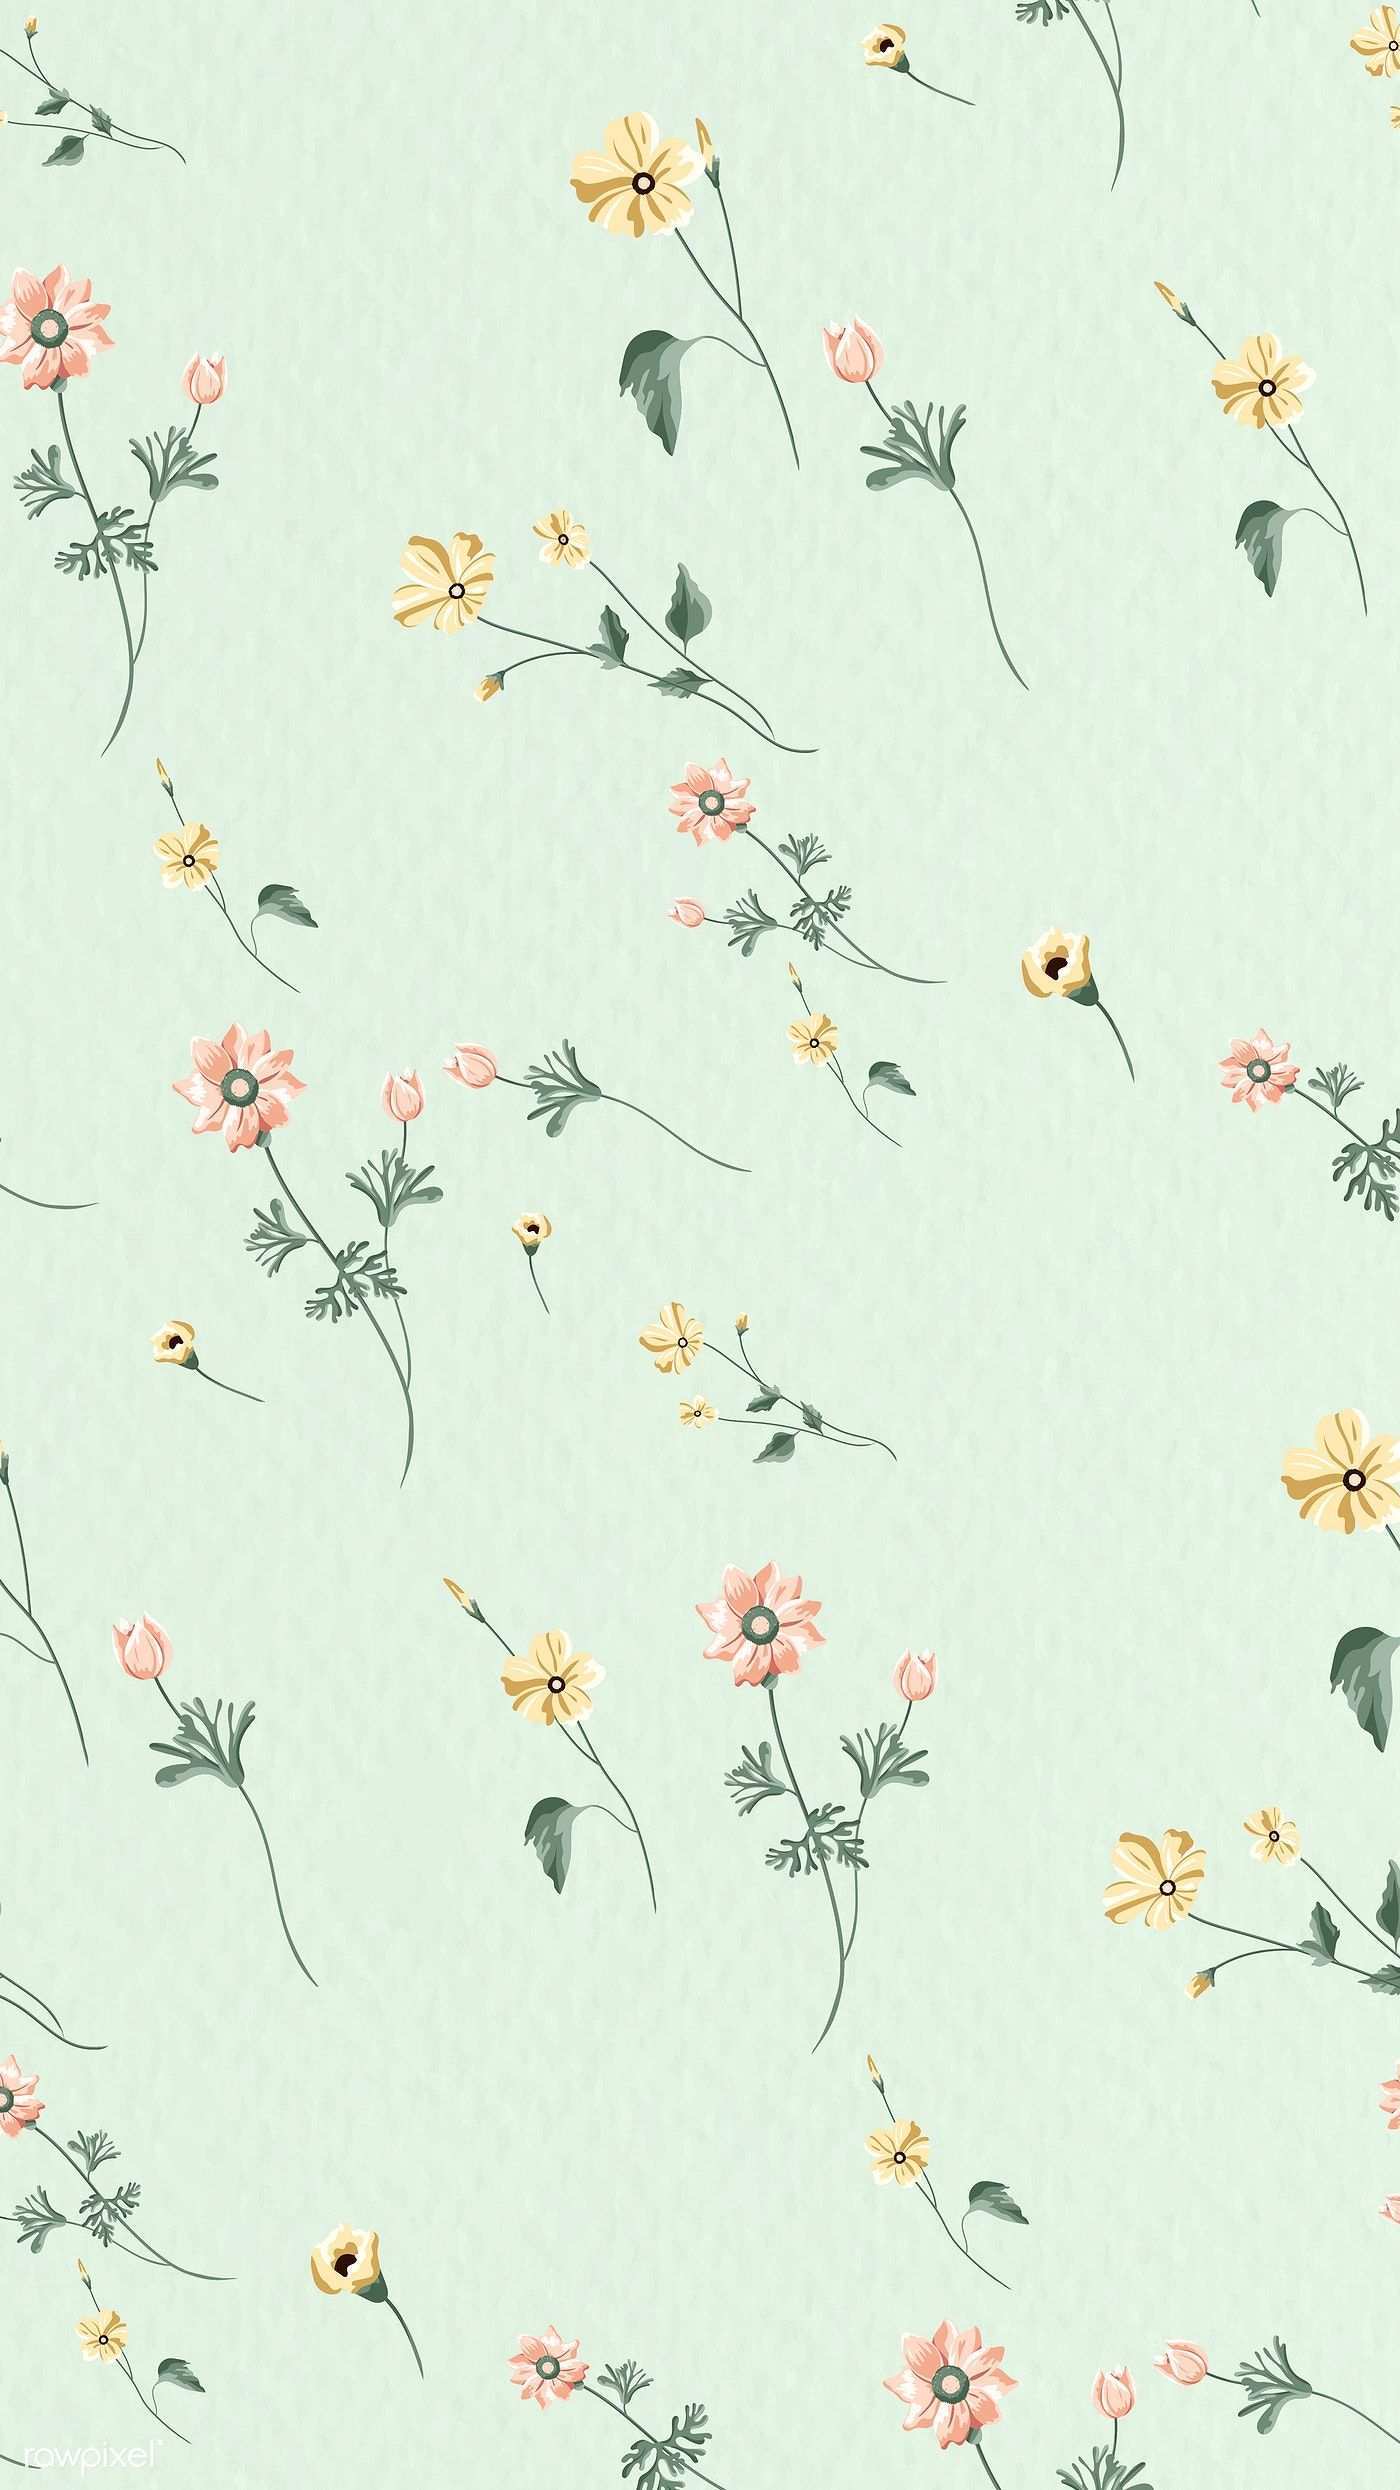 Download Premium Vector Of Blooming Flower Seamless Pattern On A Green Vintage Flowers Wallpaper Pastel Background Wallpapers Mint Green Wallpaper Iphone